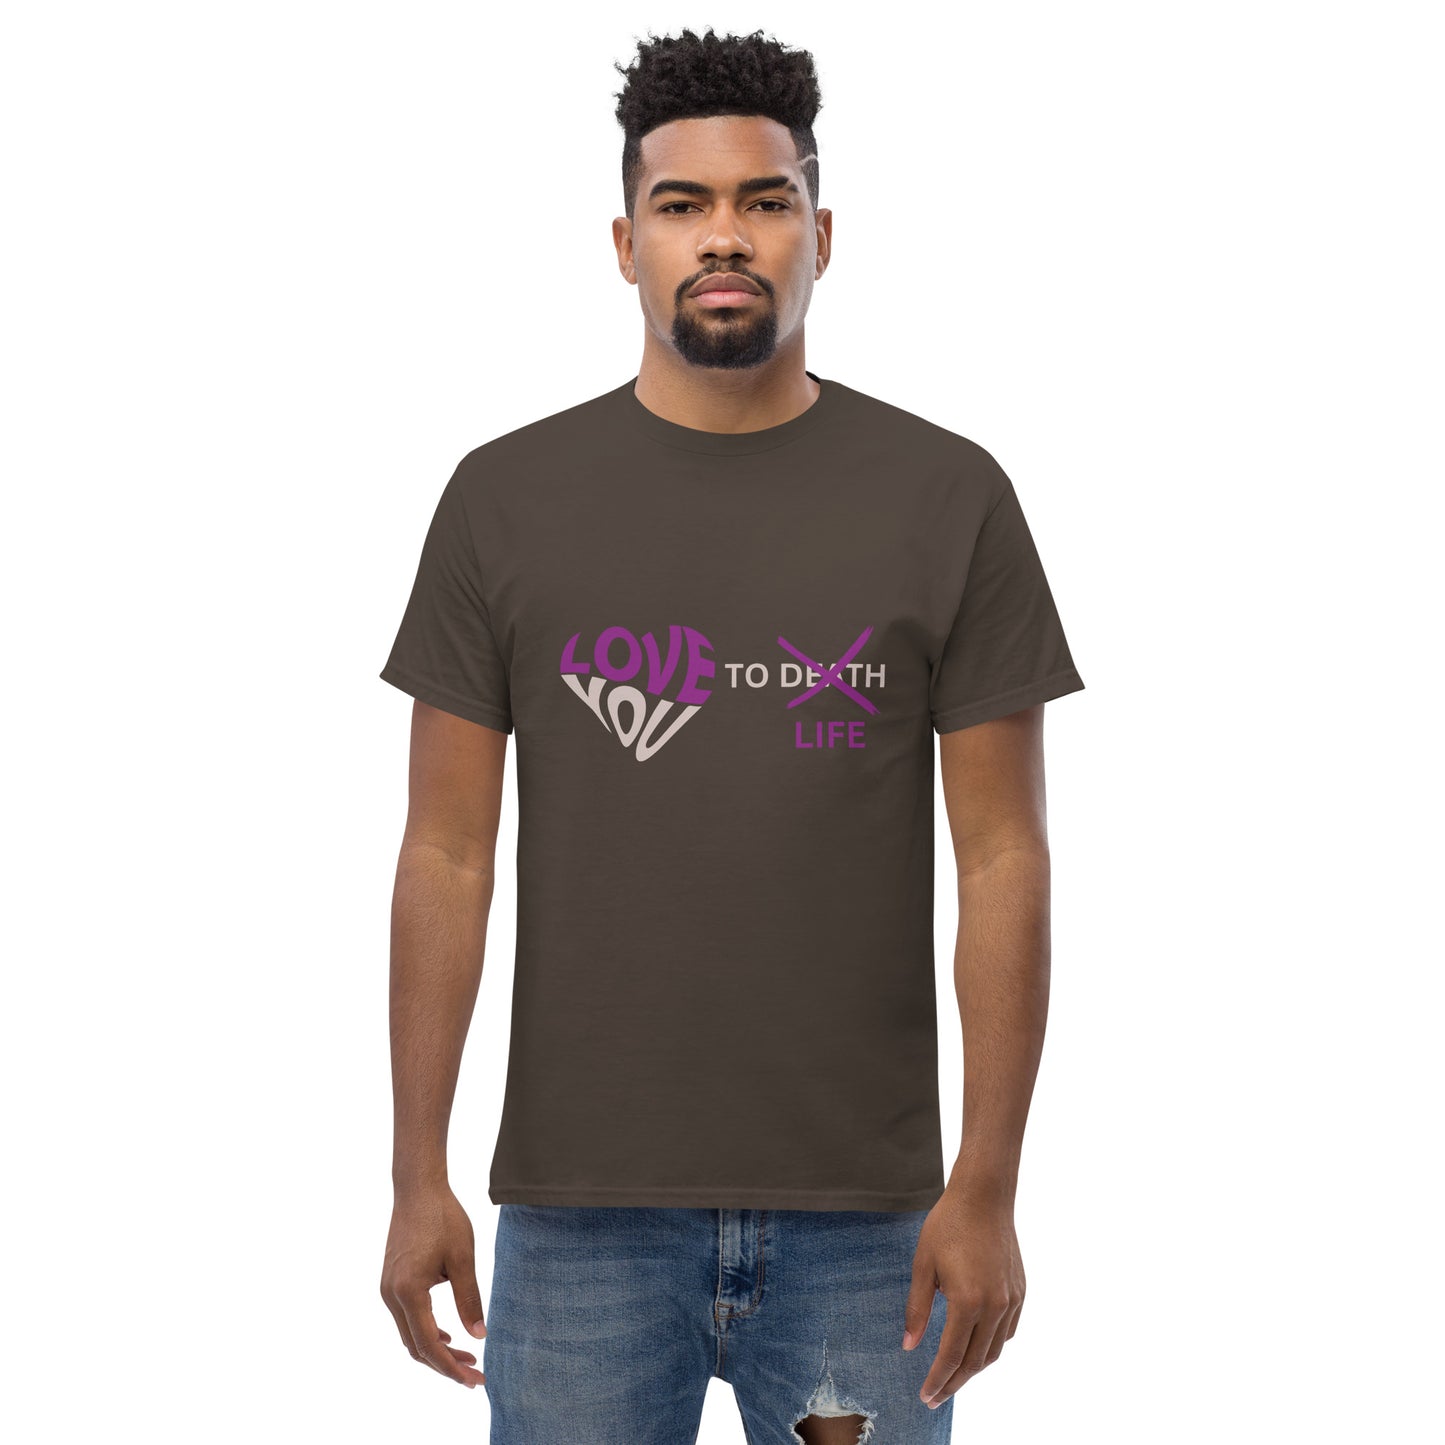 Love you to Life T-Shirt